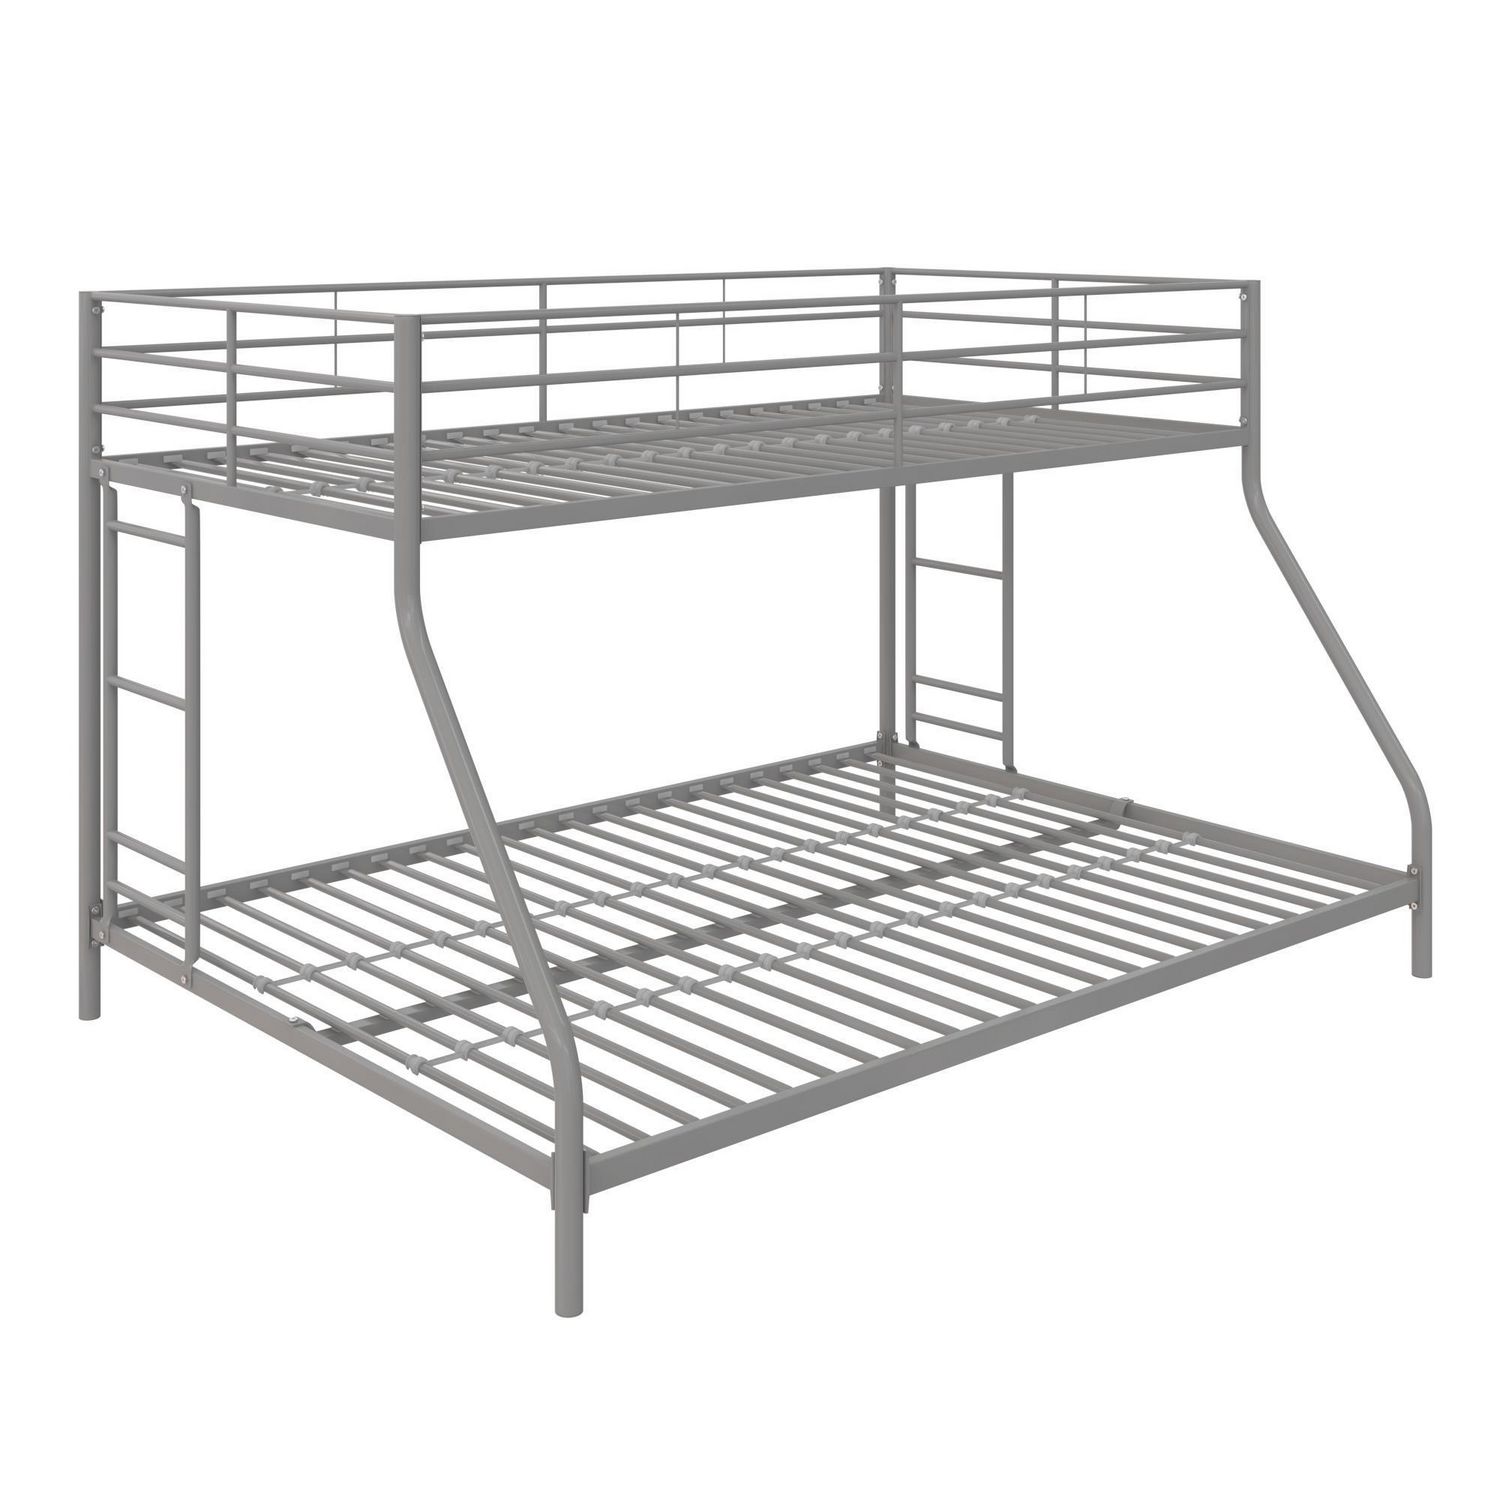 Space Junior Twin Over Full Bunk Bed, Mainstays Twin Over Full Bunk Bed